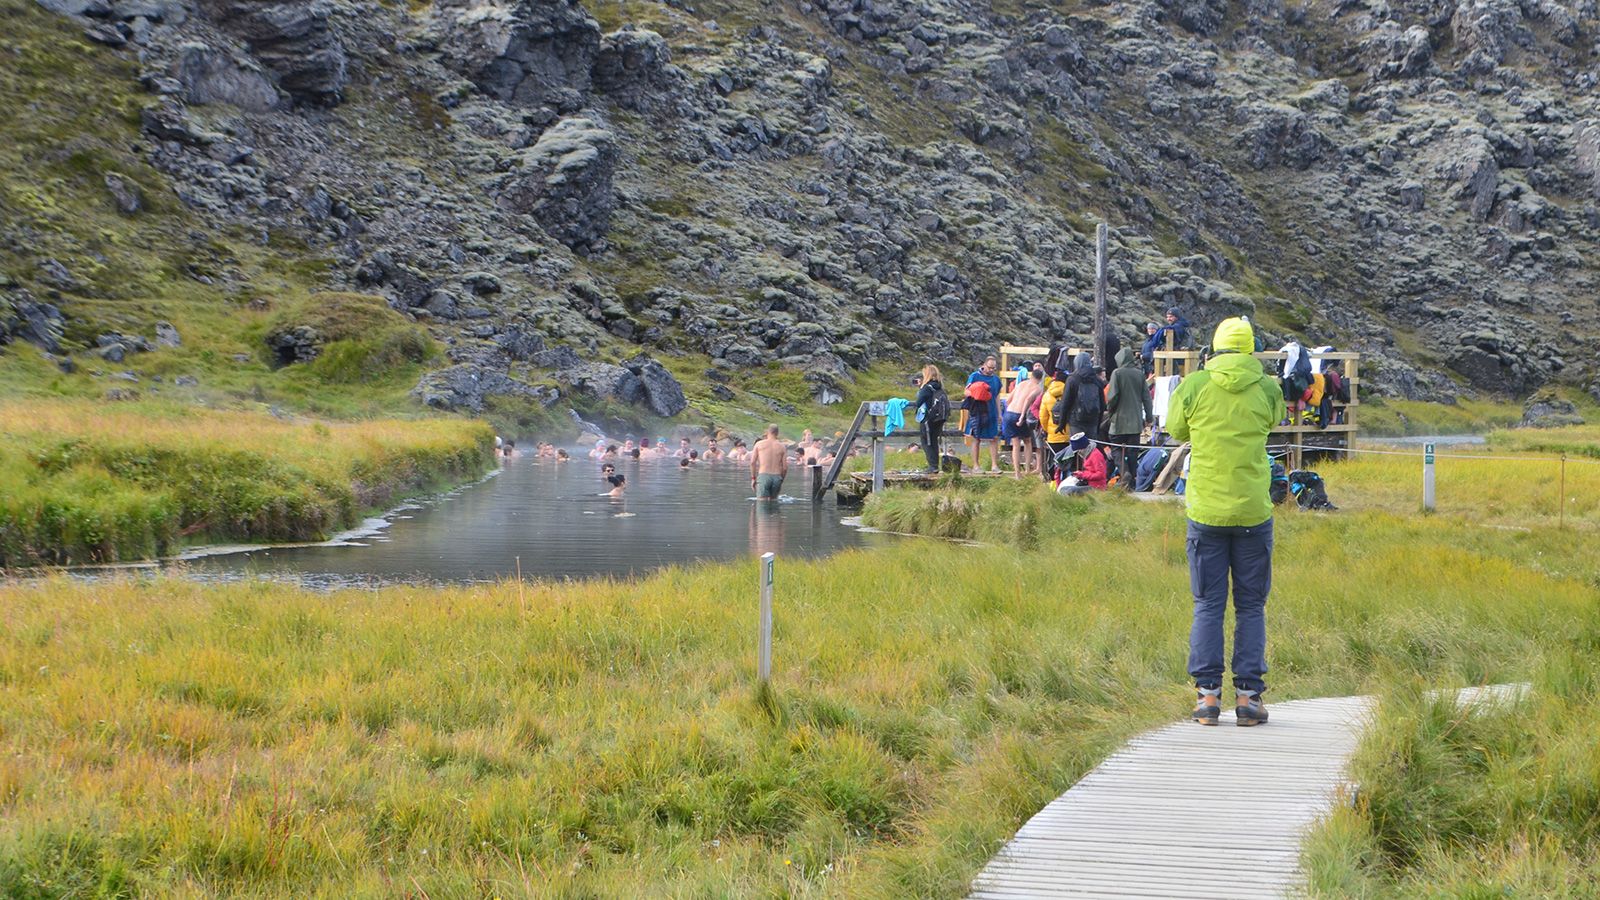 <strong>Landmannalaugar Hot Springs: </strong>The "People's Pool," as it's known locally, offers steamy and shallow springs surrounded by some of the country's most vibrant mountains.